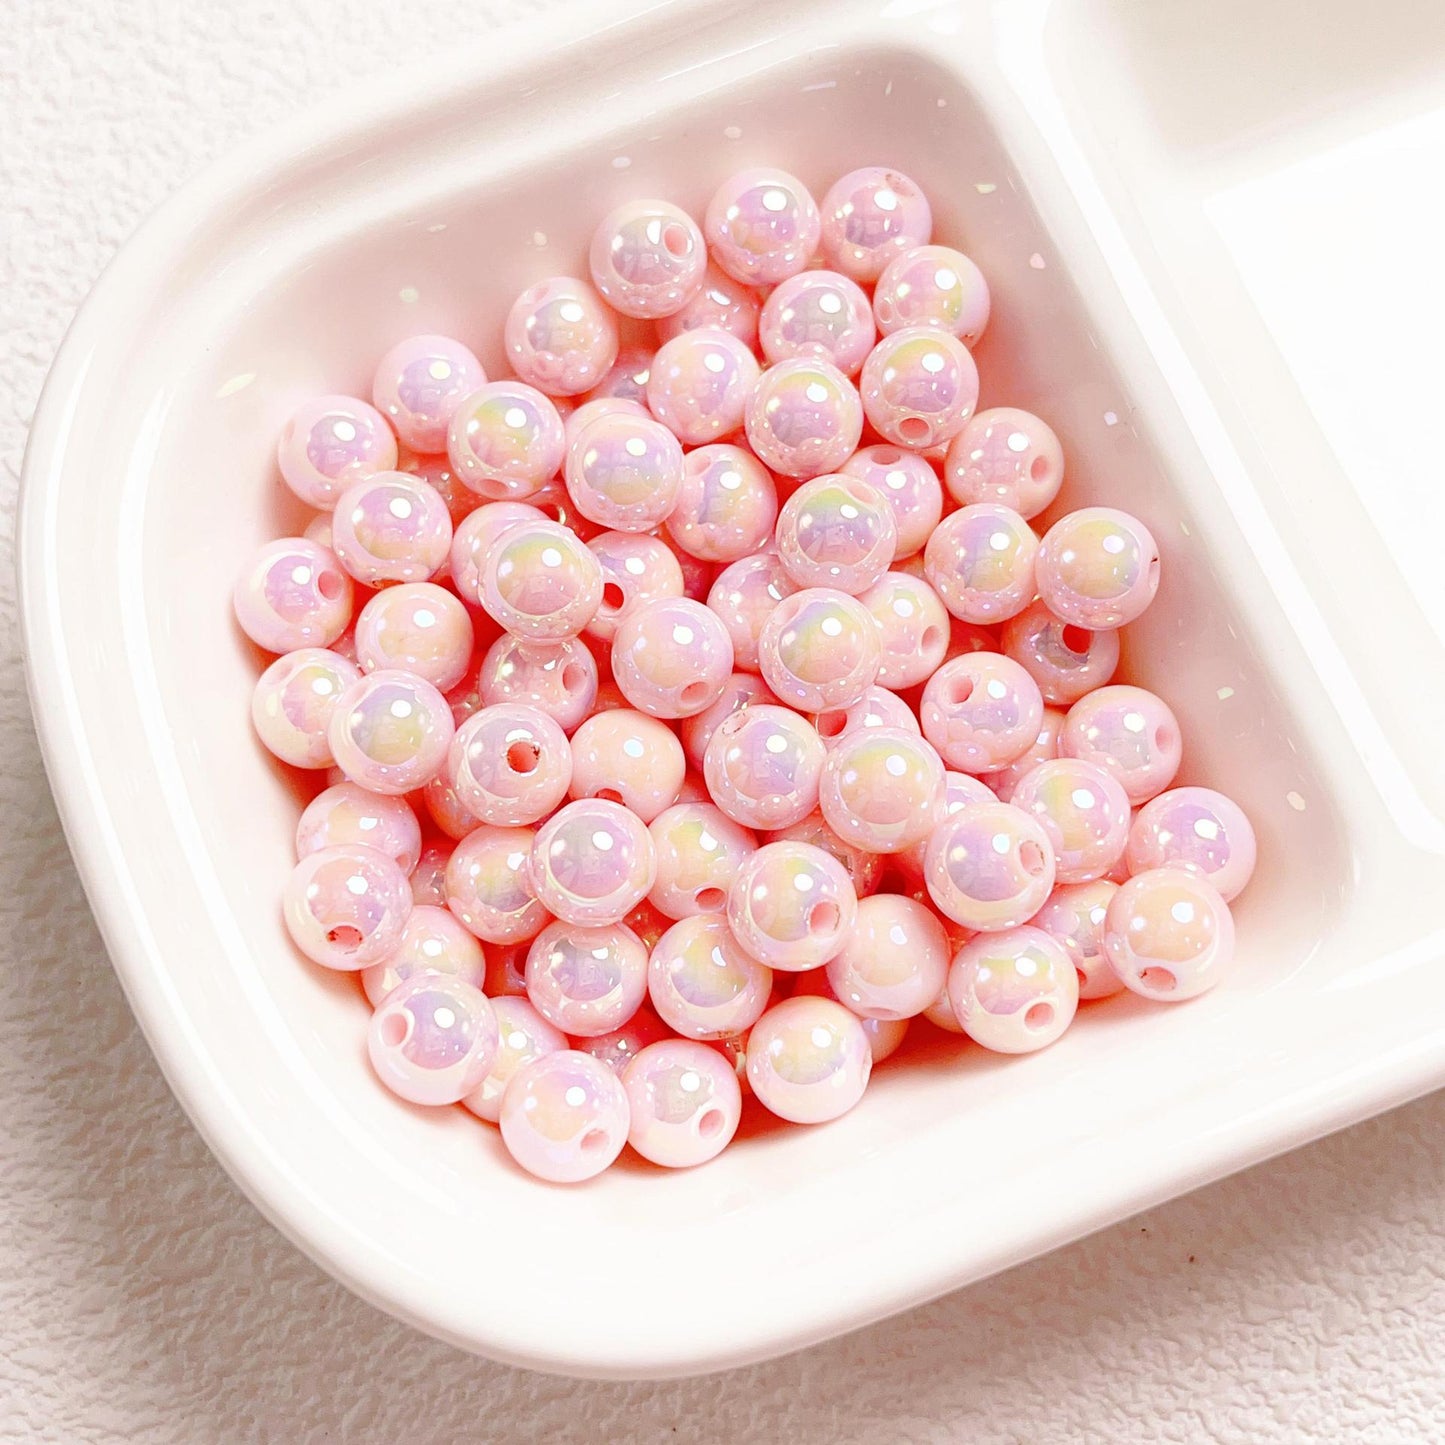 100 Pieces UV-Plated Luminous Solid Color Beads Bulk (8/12mm)